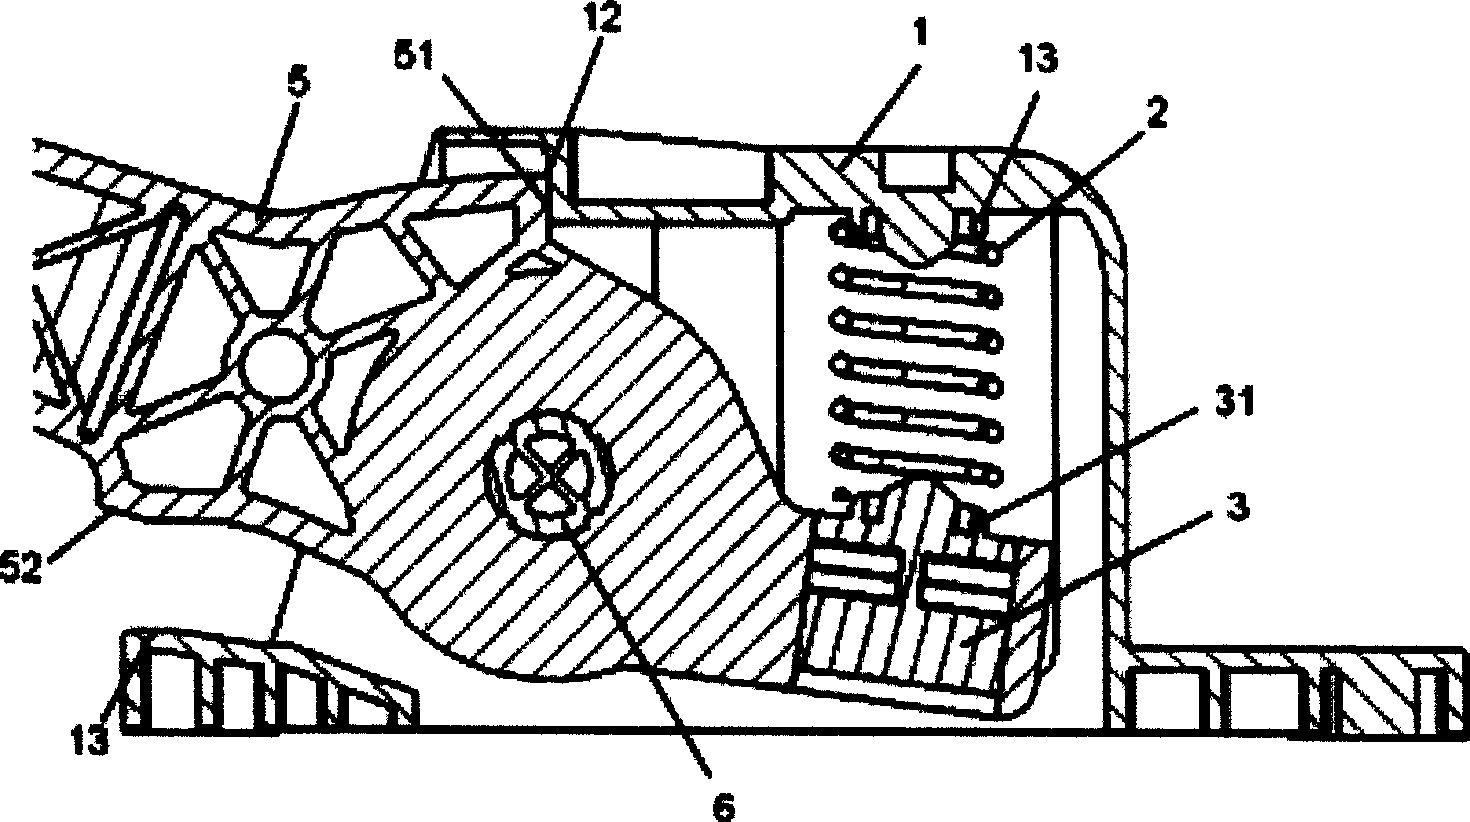 Electric accelerator pedal for vehicle